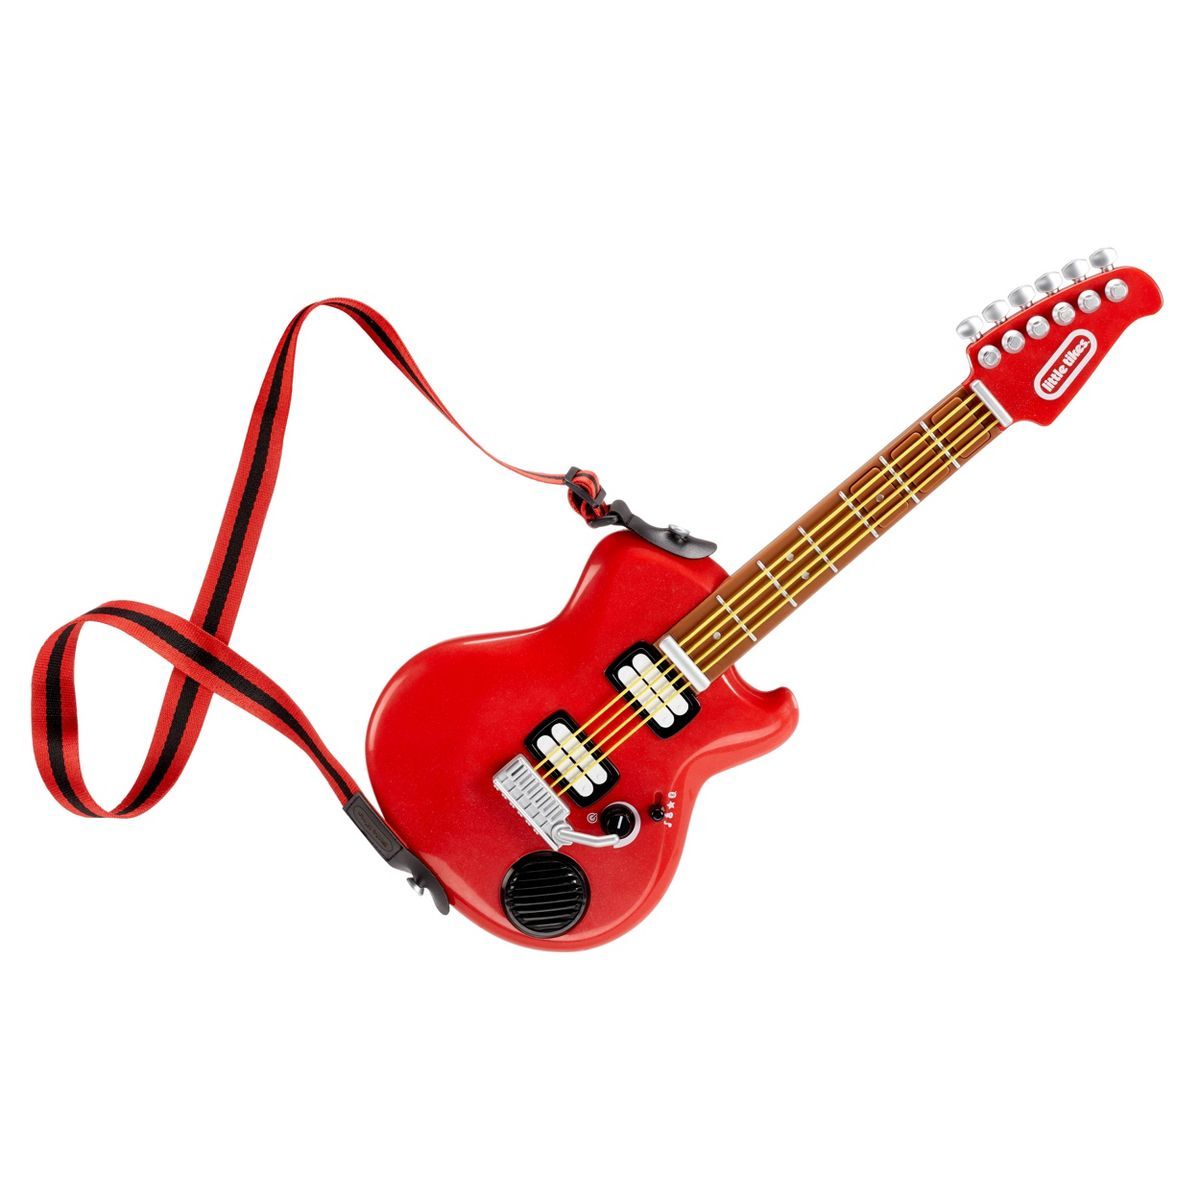 Little Tikes My Real Jam Electric Guitar - Red | Target